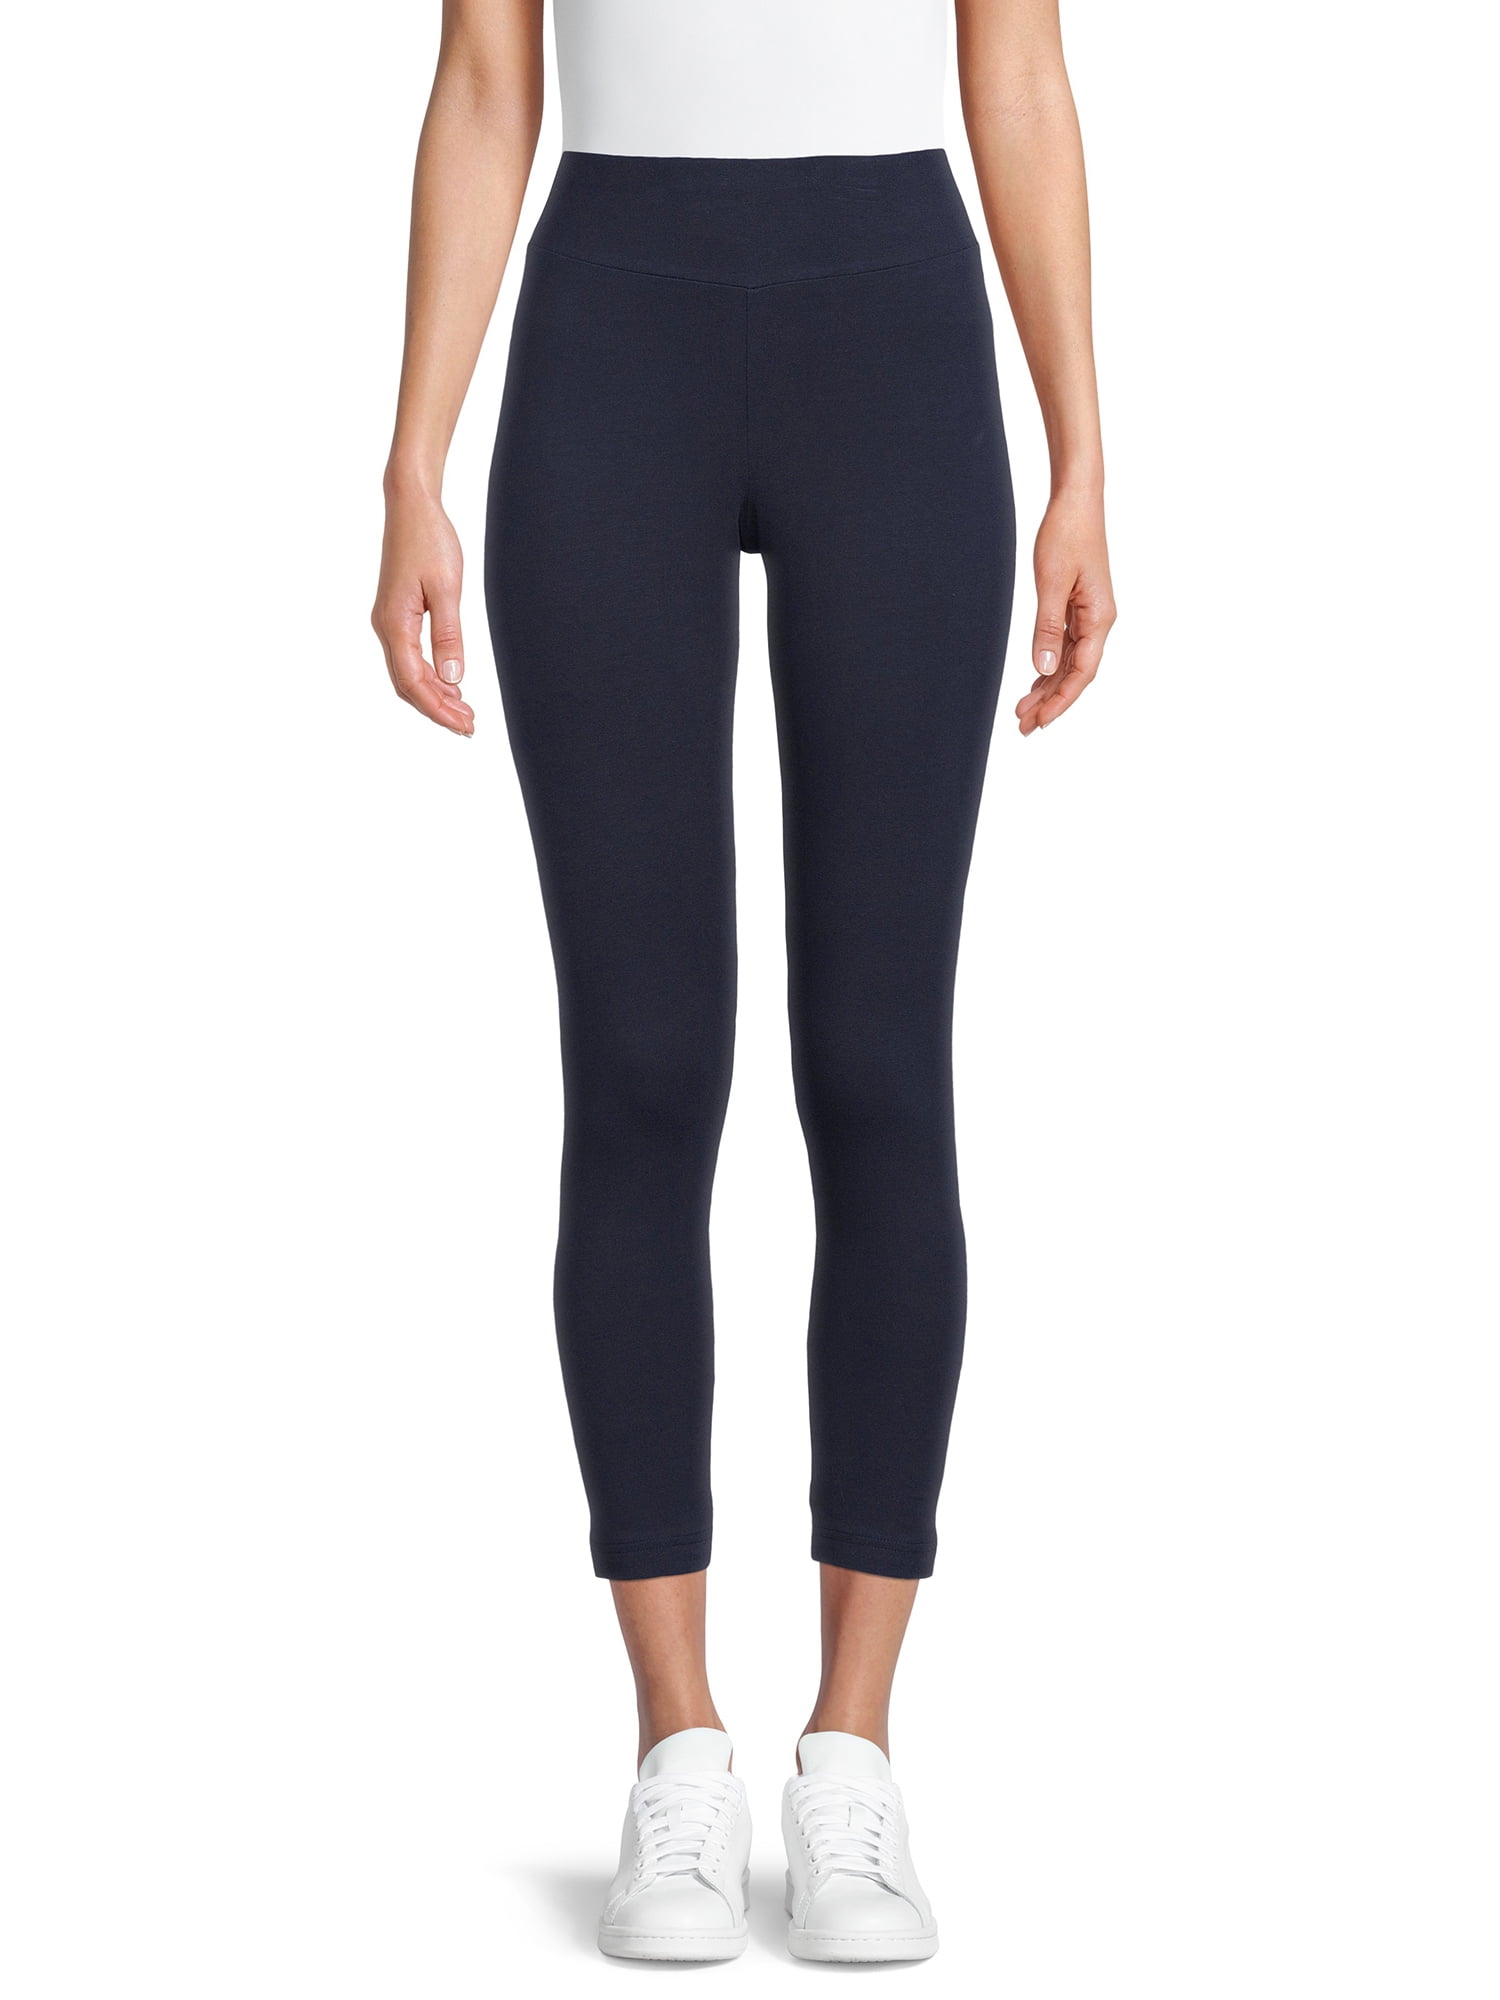 audience Upbringing Ham Time And Tru Women's High Rise Ankle Knit Leggings - Walmart.com